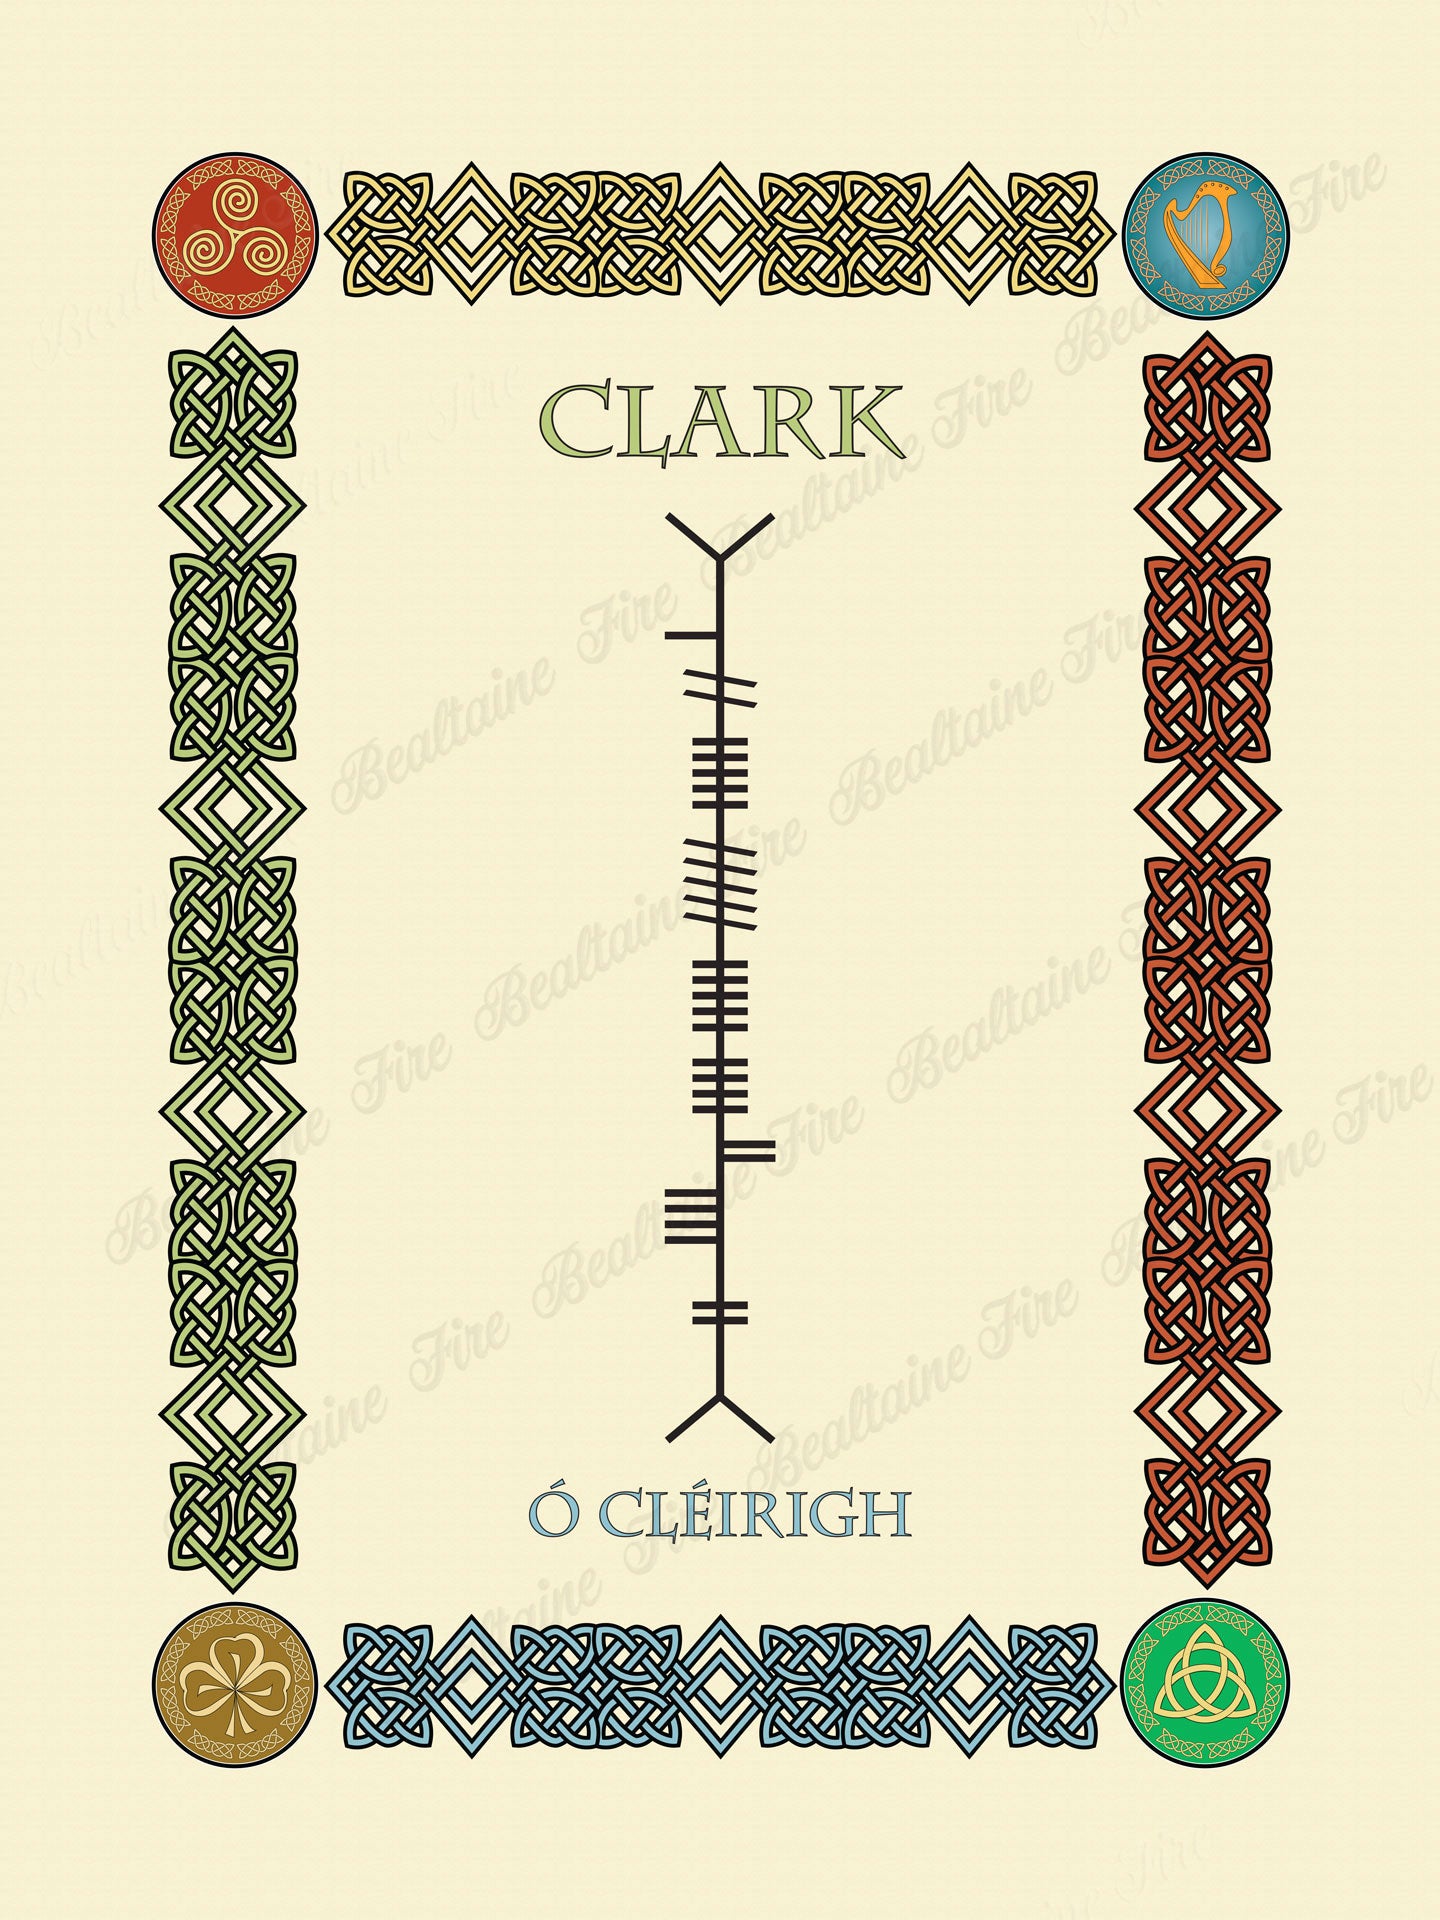 Clark in Old Irish and Ogham - PDF Download